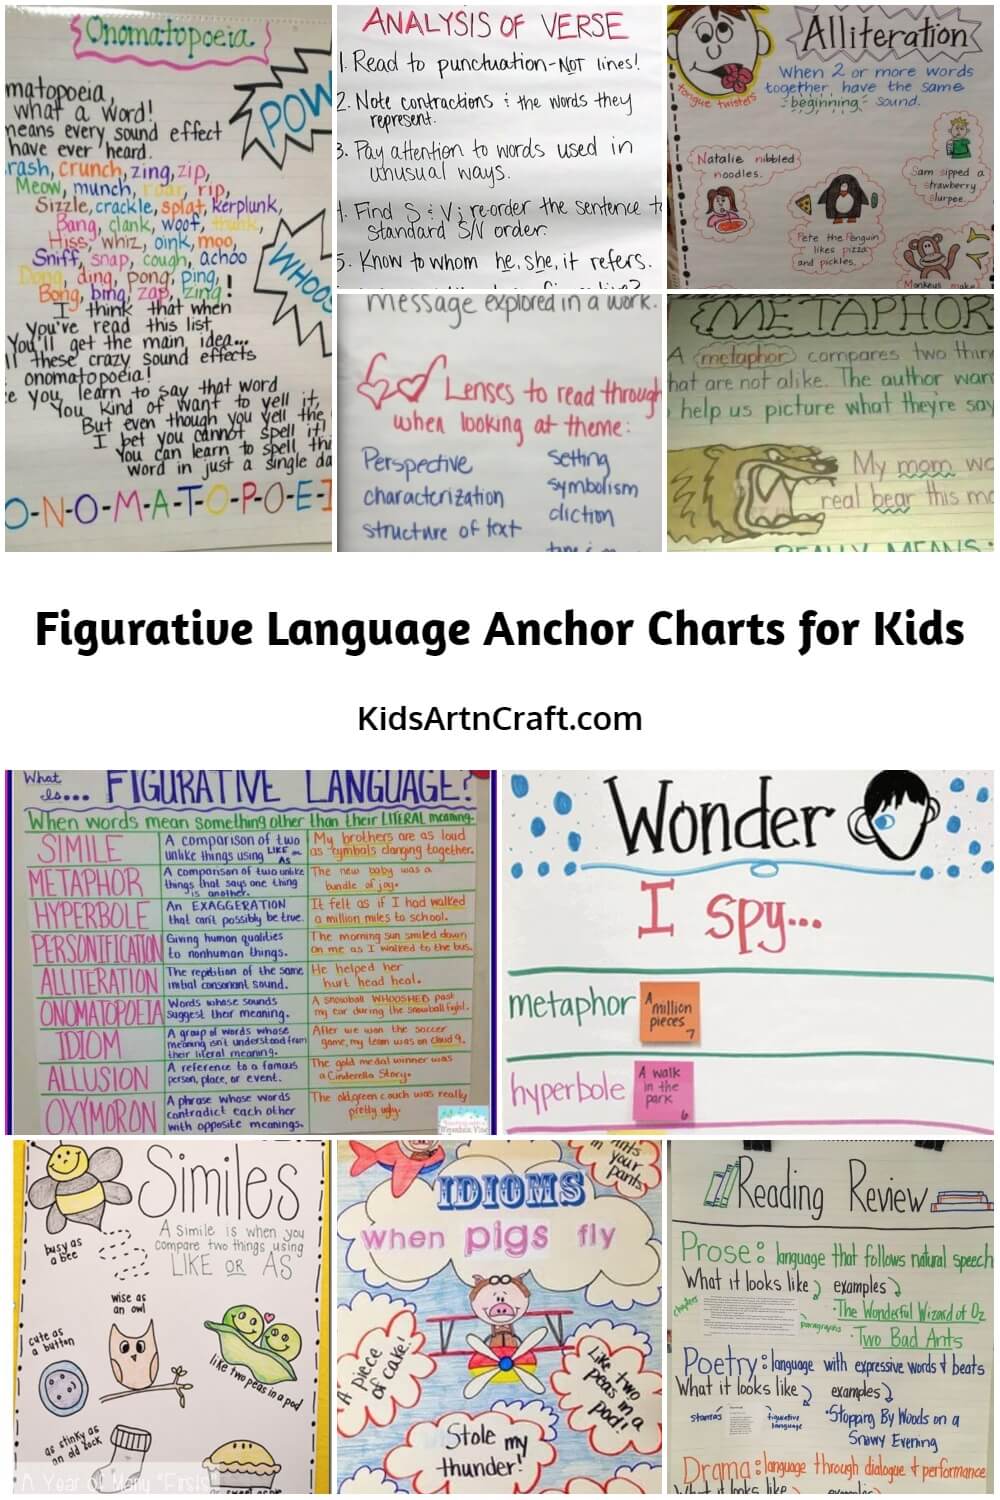 Figurative Language Anchor Charts for Kids